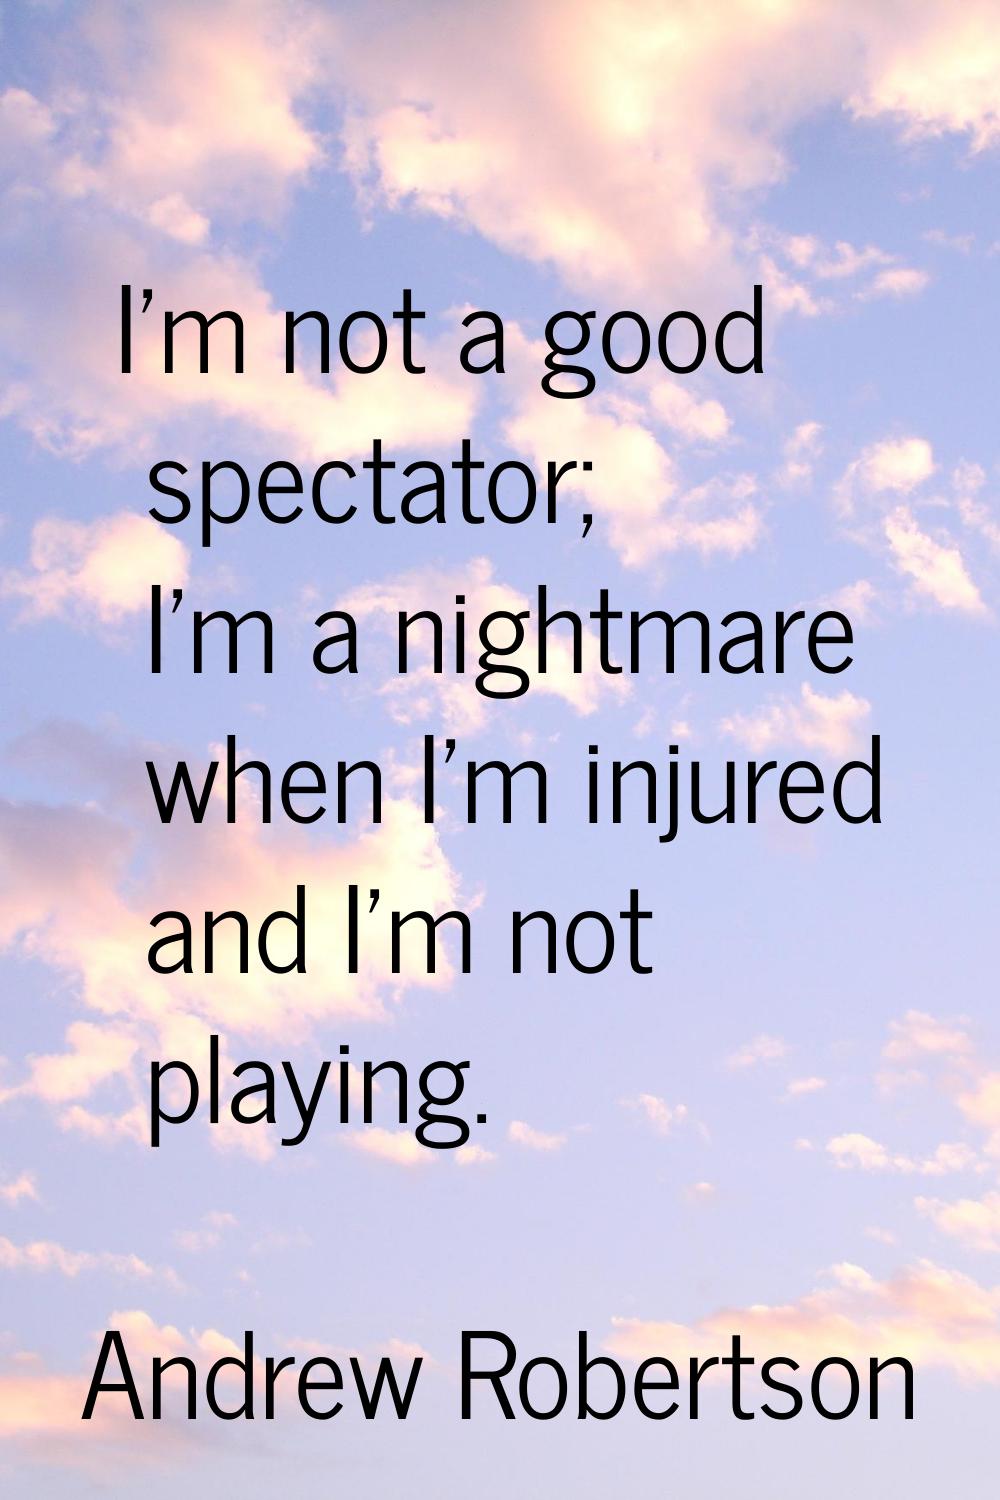 I'm not a good spectator; I'm a nightmare when I'm injured and I'm not playing.